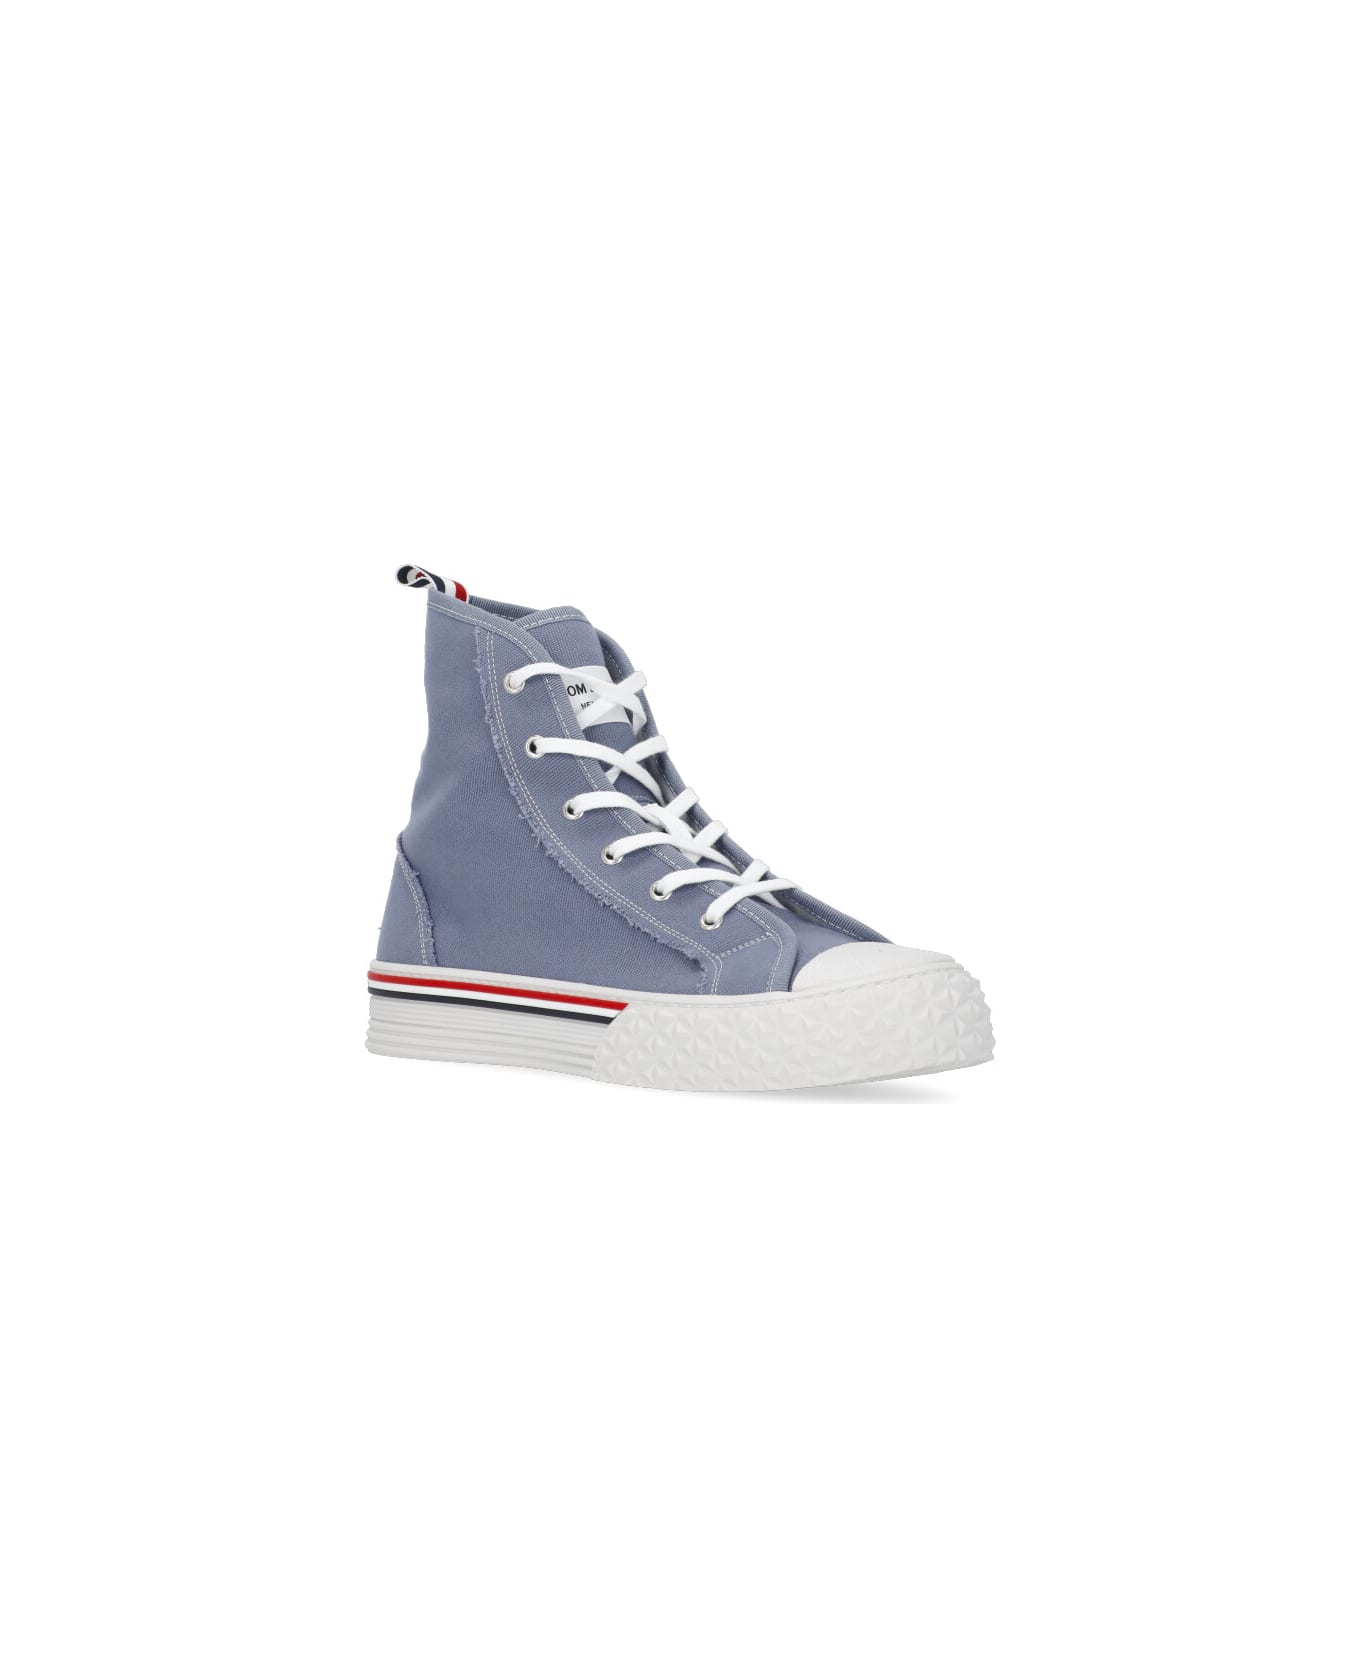 Thom Browne Sneakers In Light Blue Canvas - Light Blue スニーカー